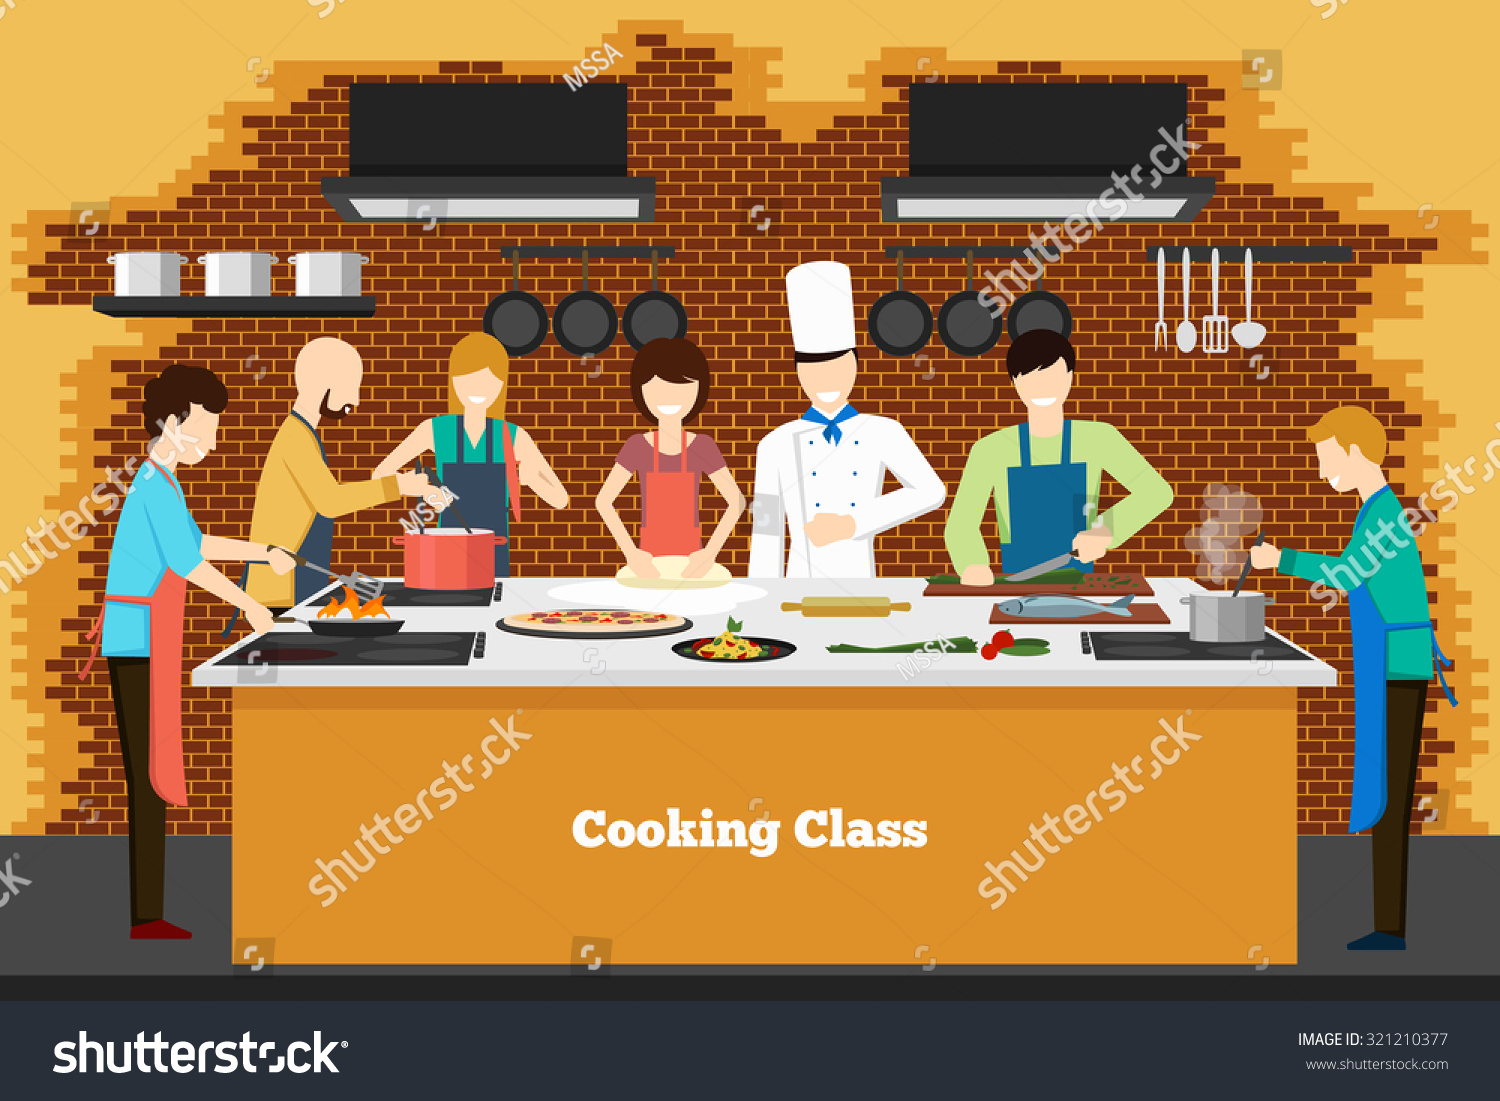 clipart cooking class - photo #16